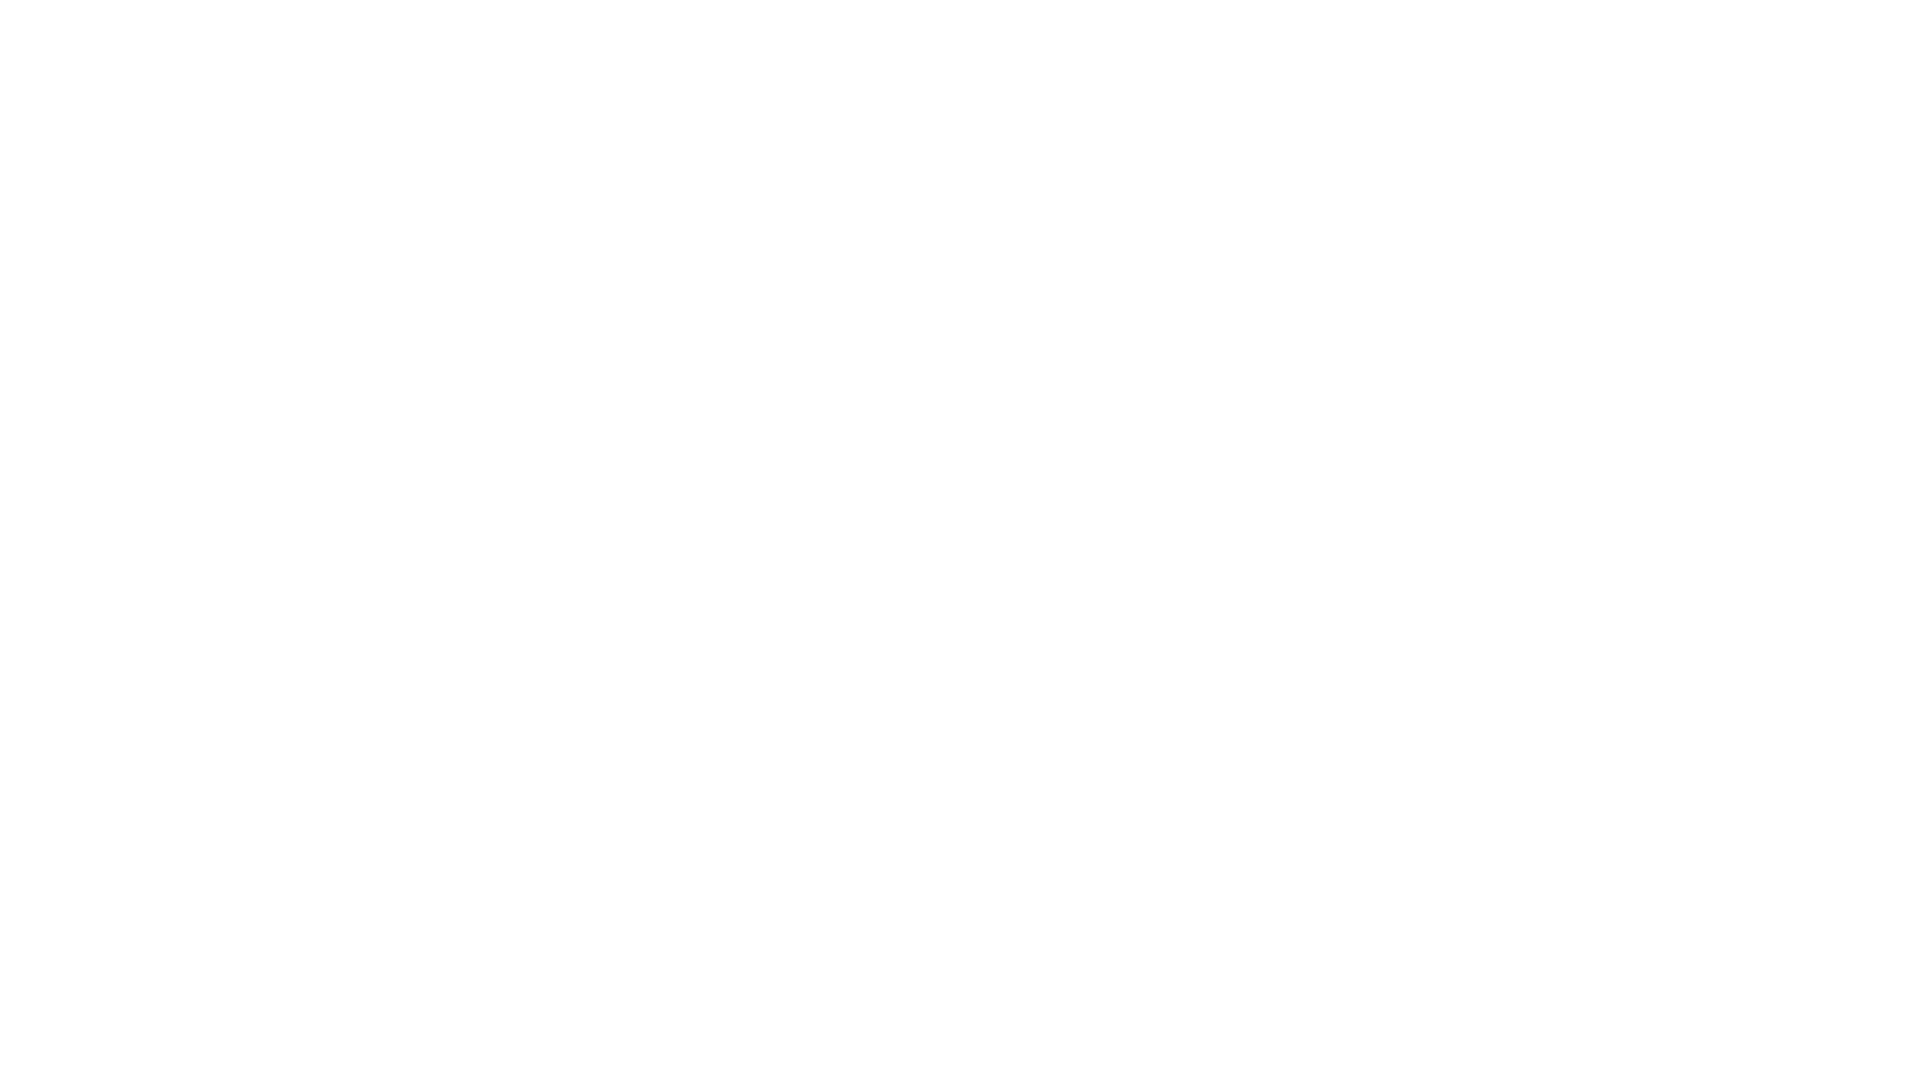 St. Mary's Bletchley